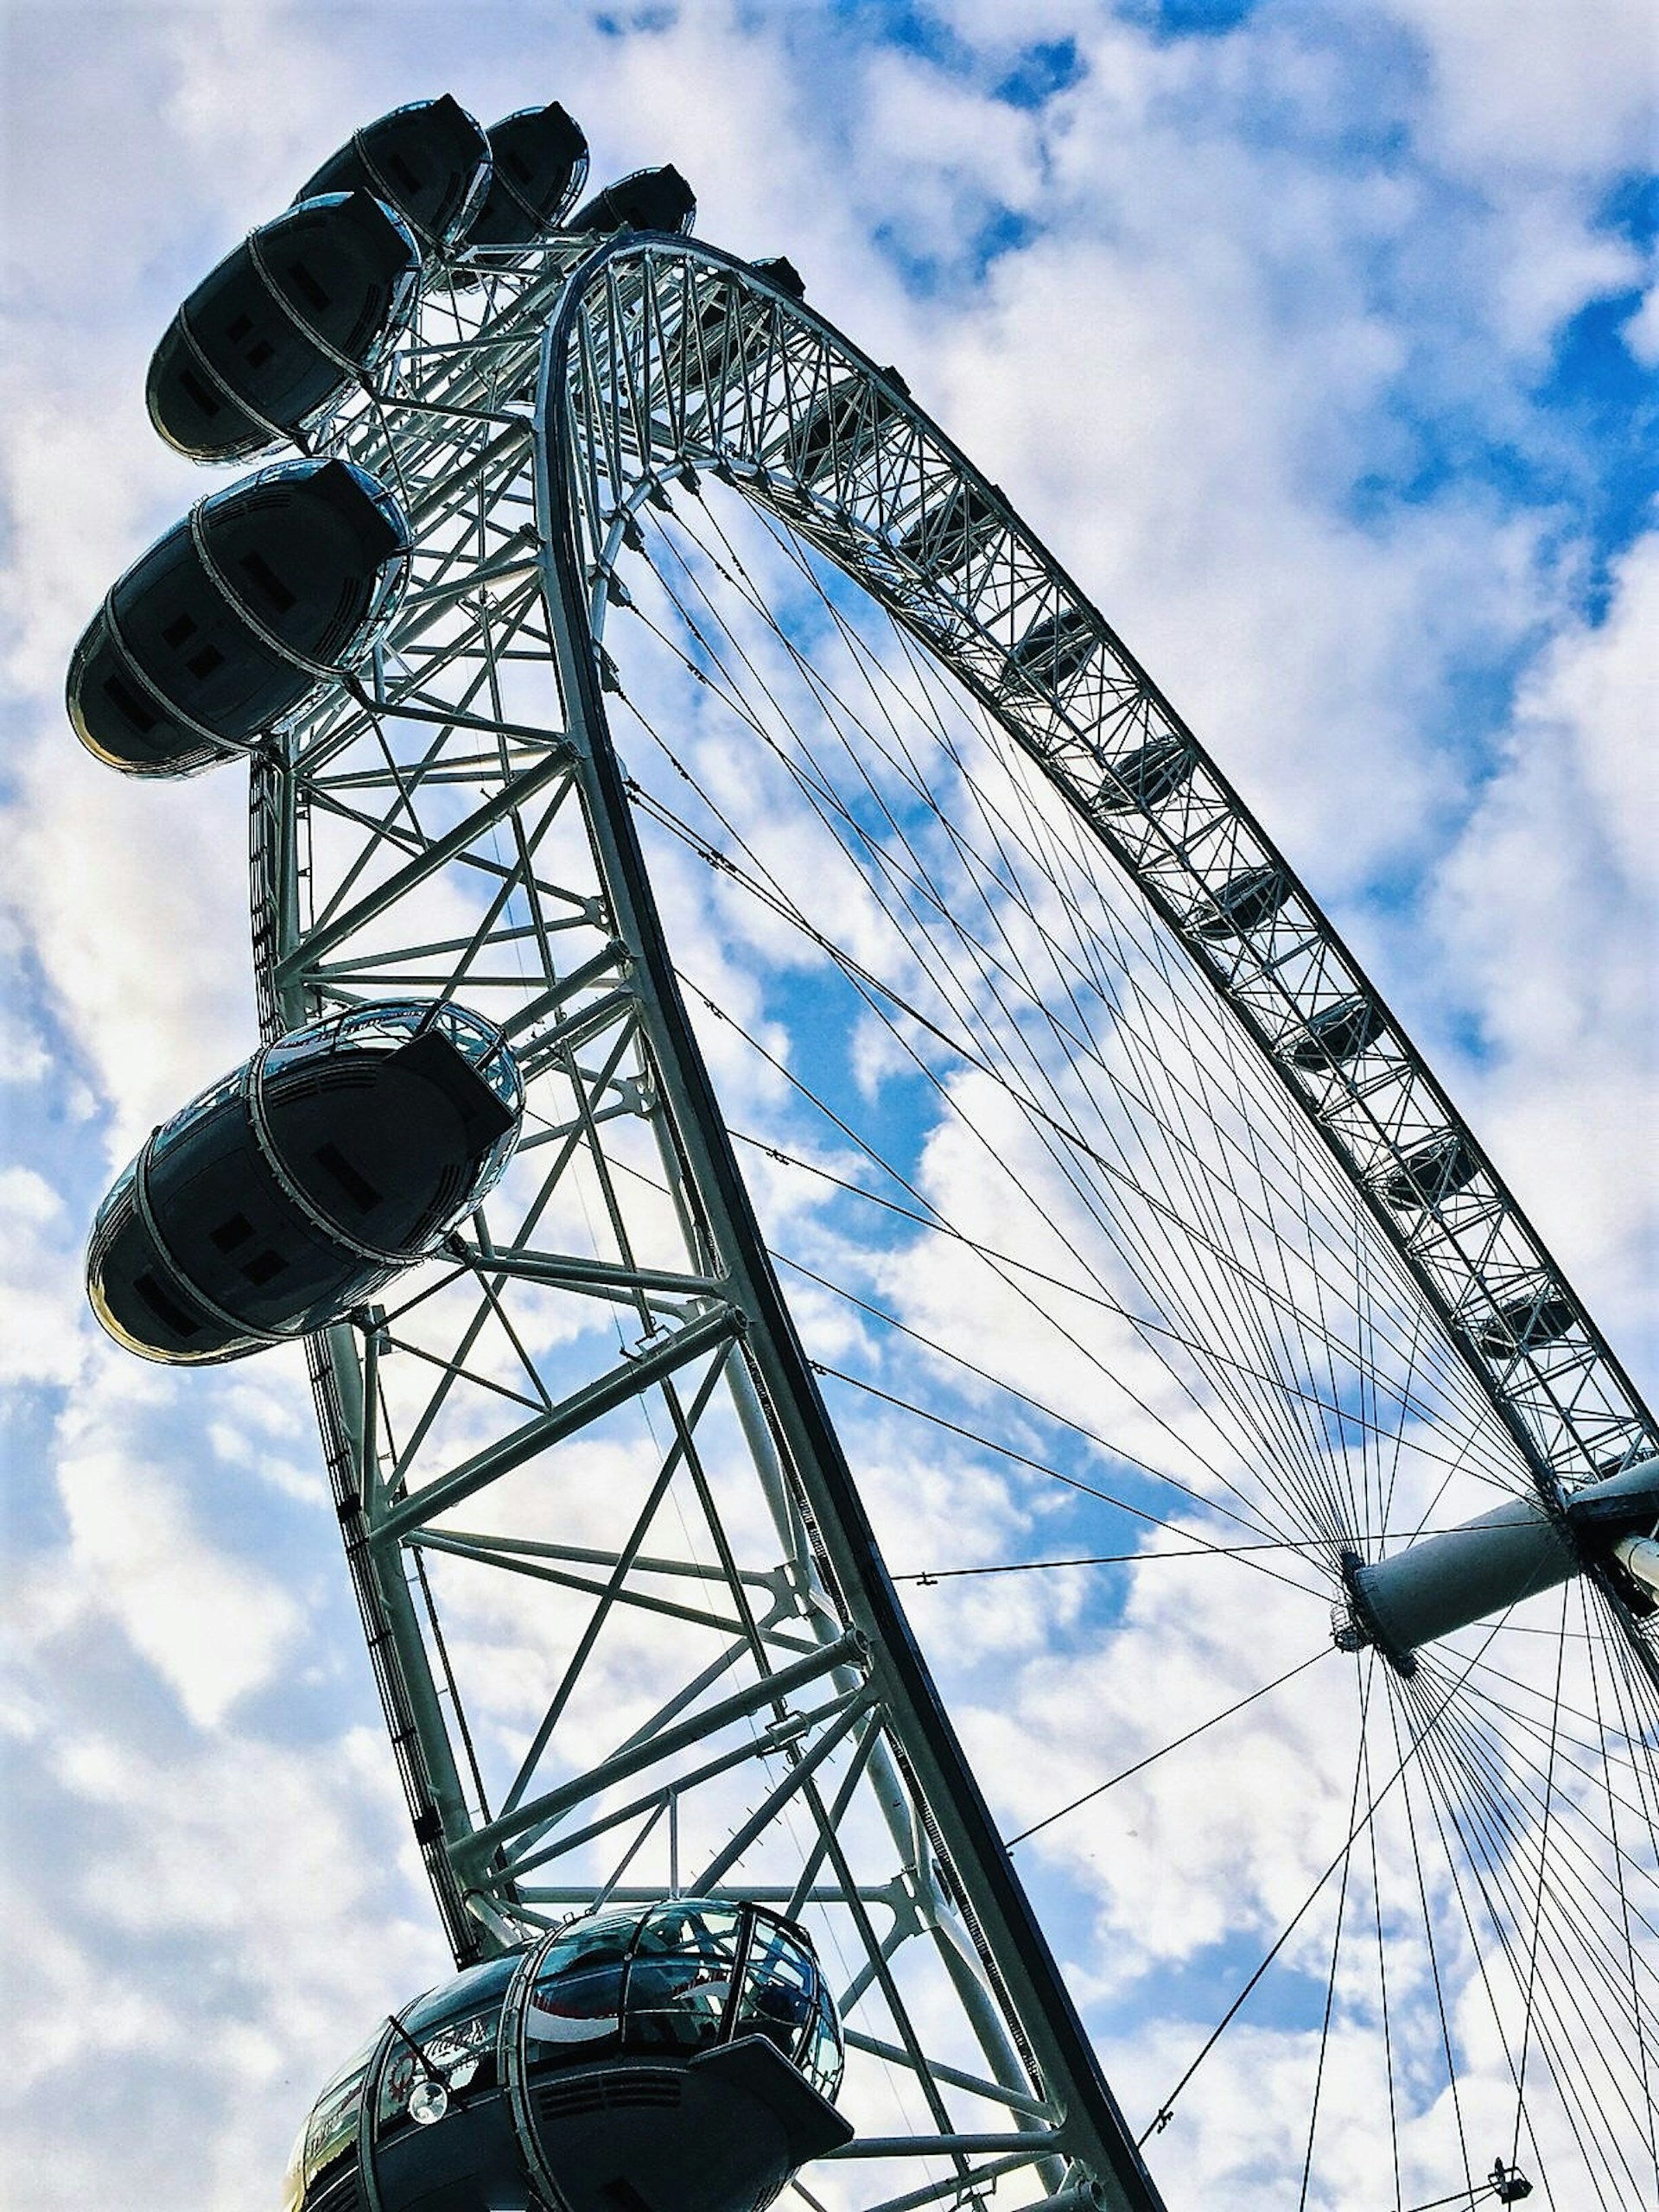 A view looking up at the London Eye from ground level